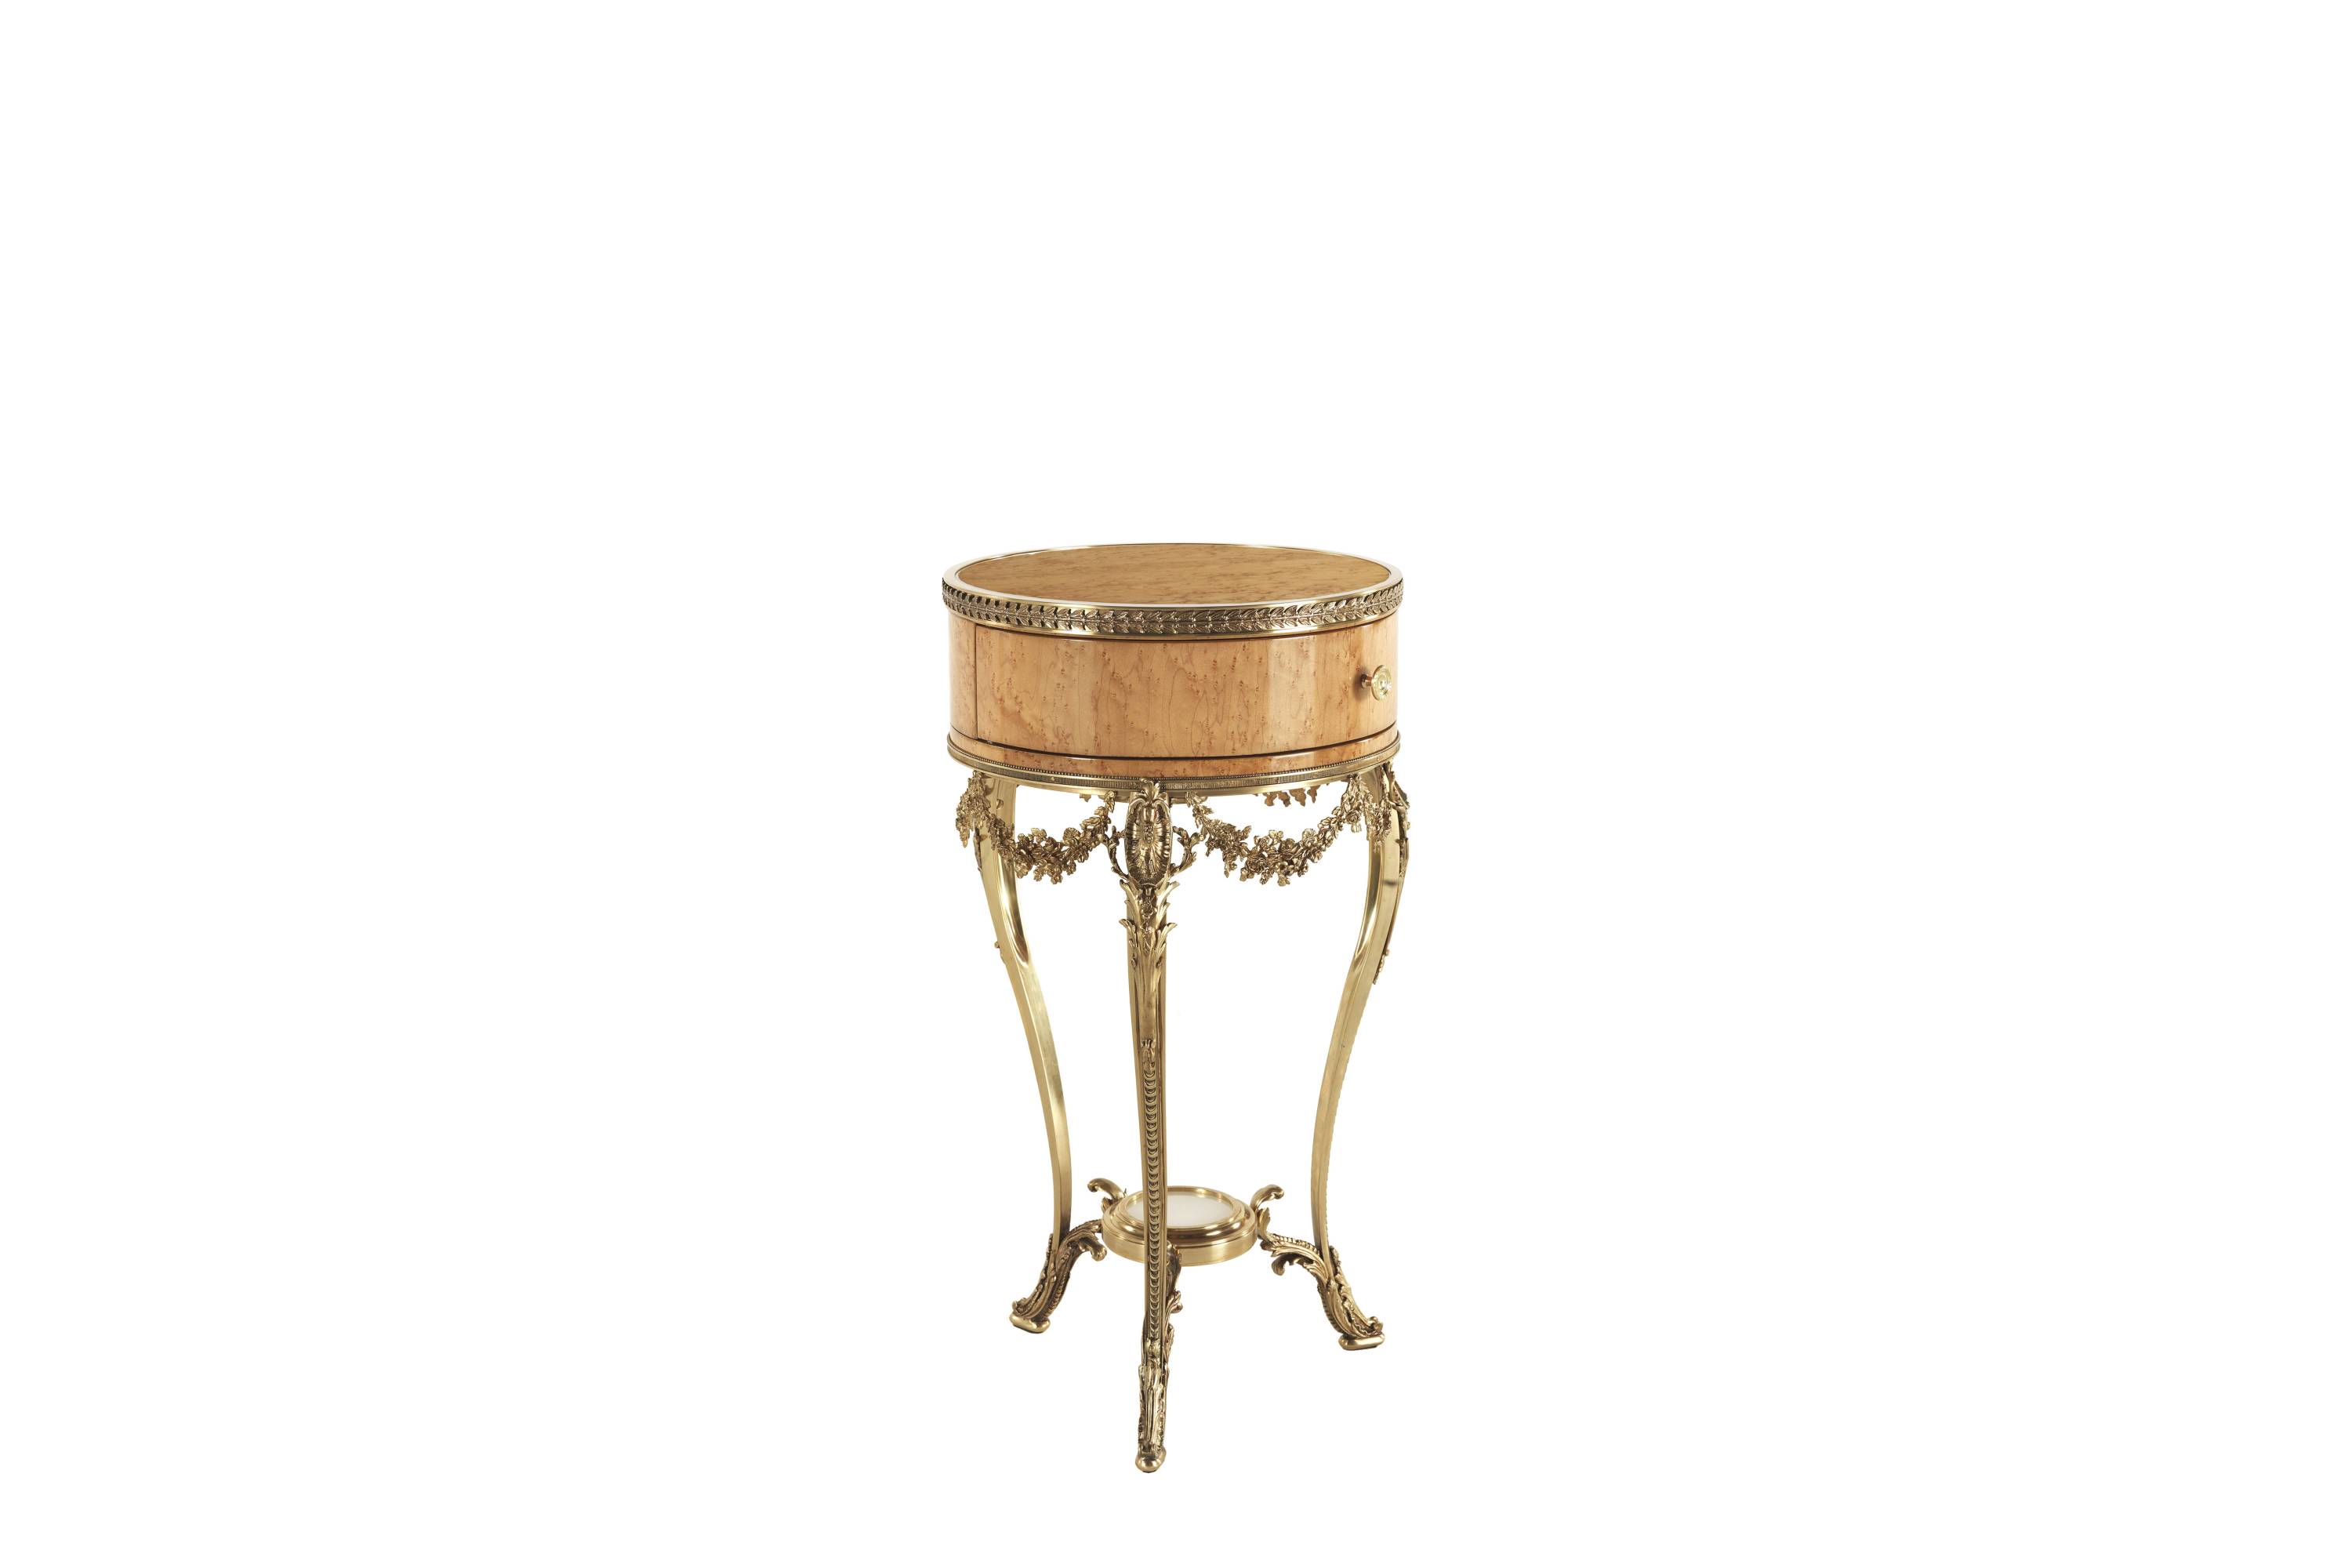 PLEASURE night table - A luxury experience with the Savoir-Faire collection and its classic luxurious furniture